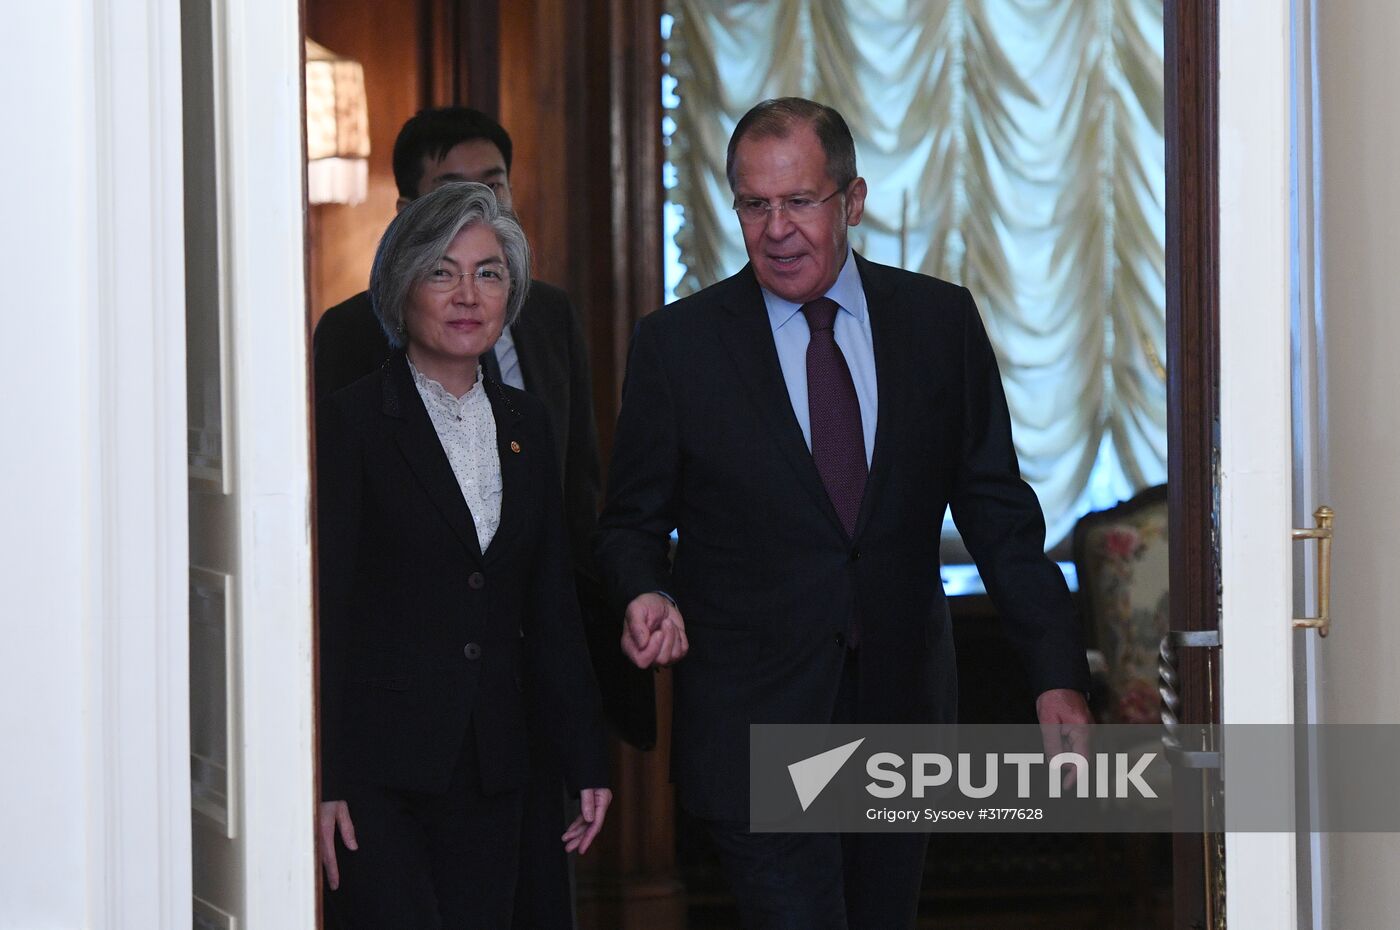 Russian Foreign Minister Sergei Lavrov meets with South Korea's Kang Kyung-wha